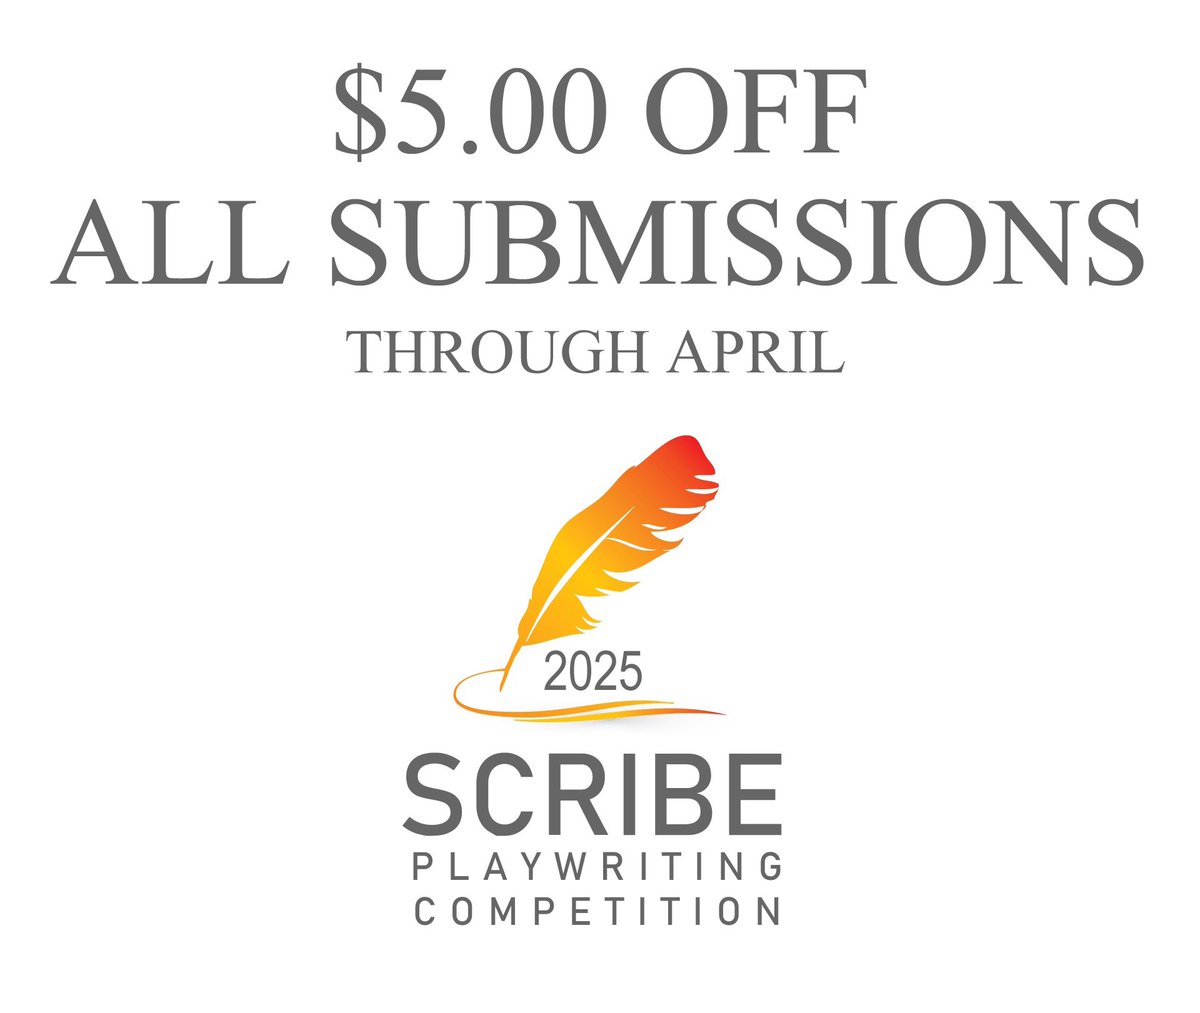 Hey, playwrights! $5.00 OFF ALL PLAY SUBMISSIONS through the end of April. Submit your full length and one-act plays here: scribeplaywriting.weebly.com #playwriting #playwright #playwrights #writingtwitter #writing #theater #theatre #dramaturgy #newplays #writer #writingcommunity